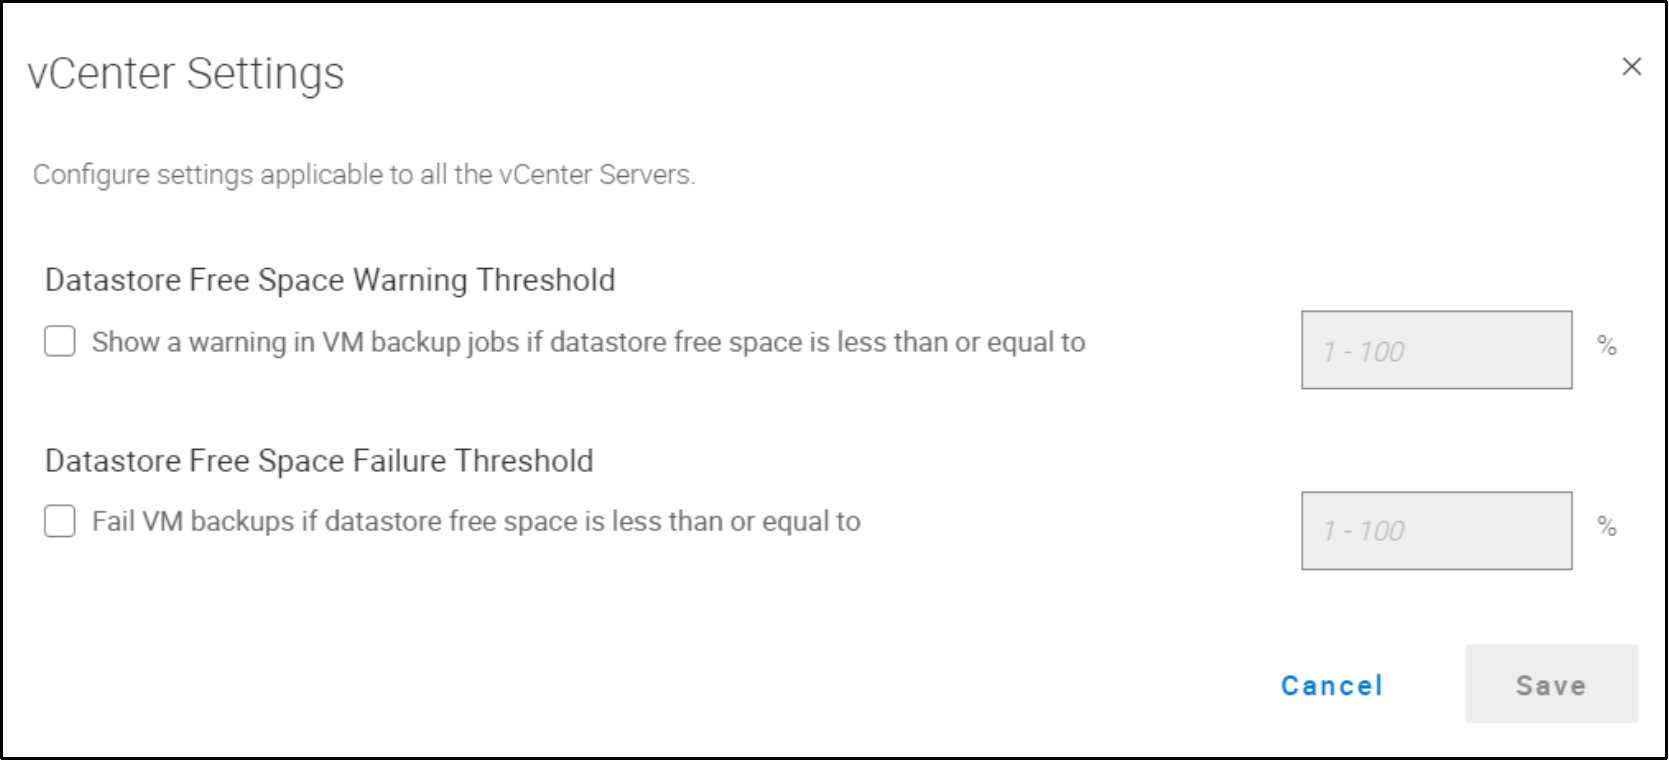 This diagram depicts datastore free space threshold settings